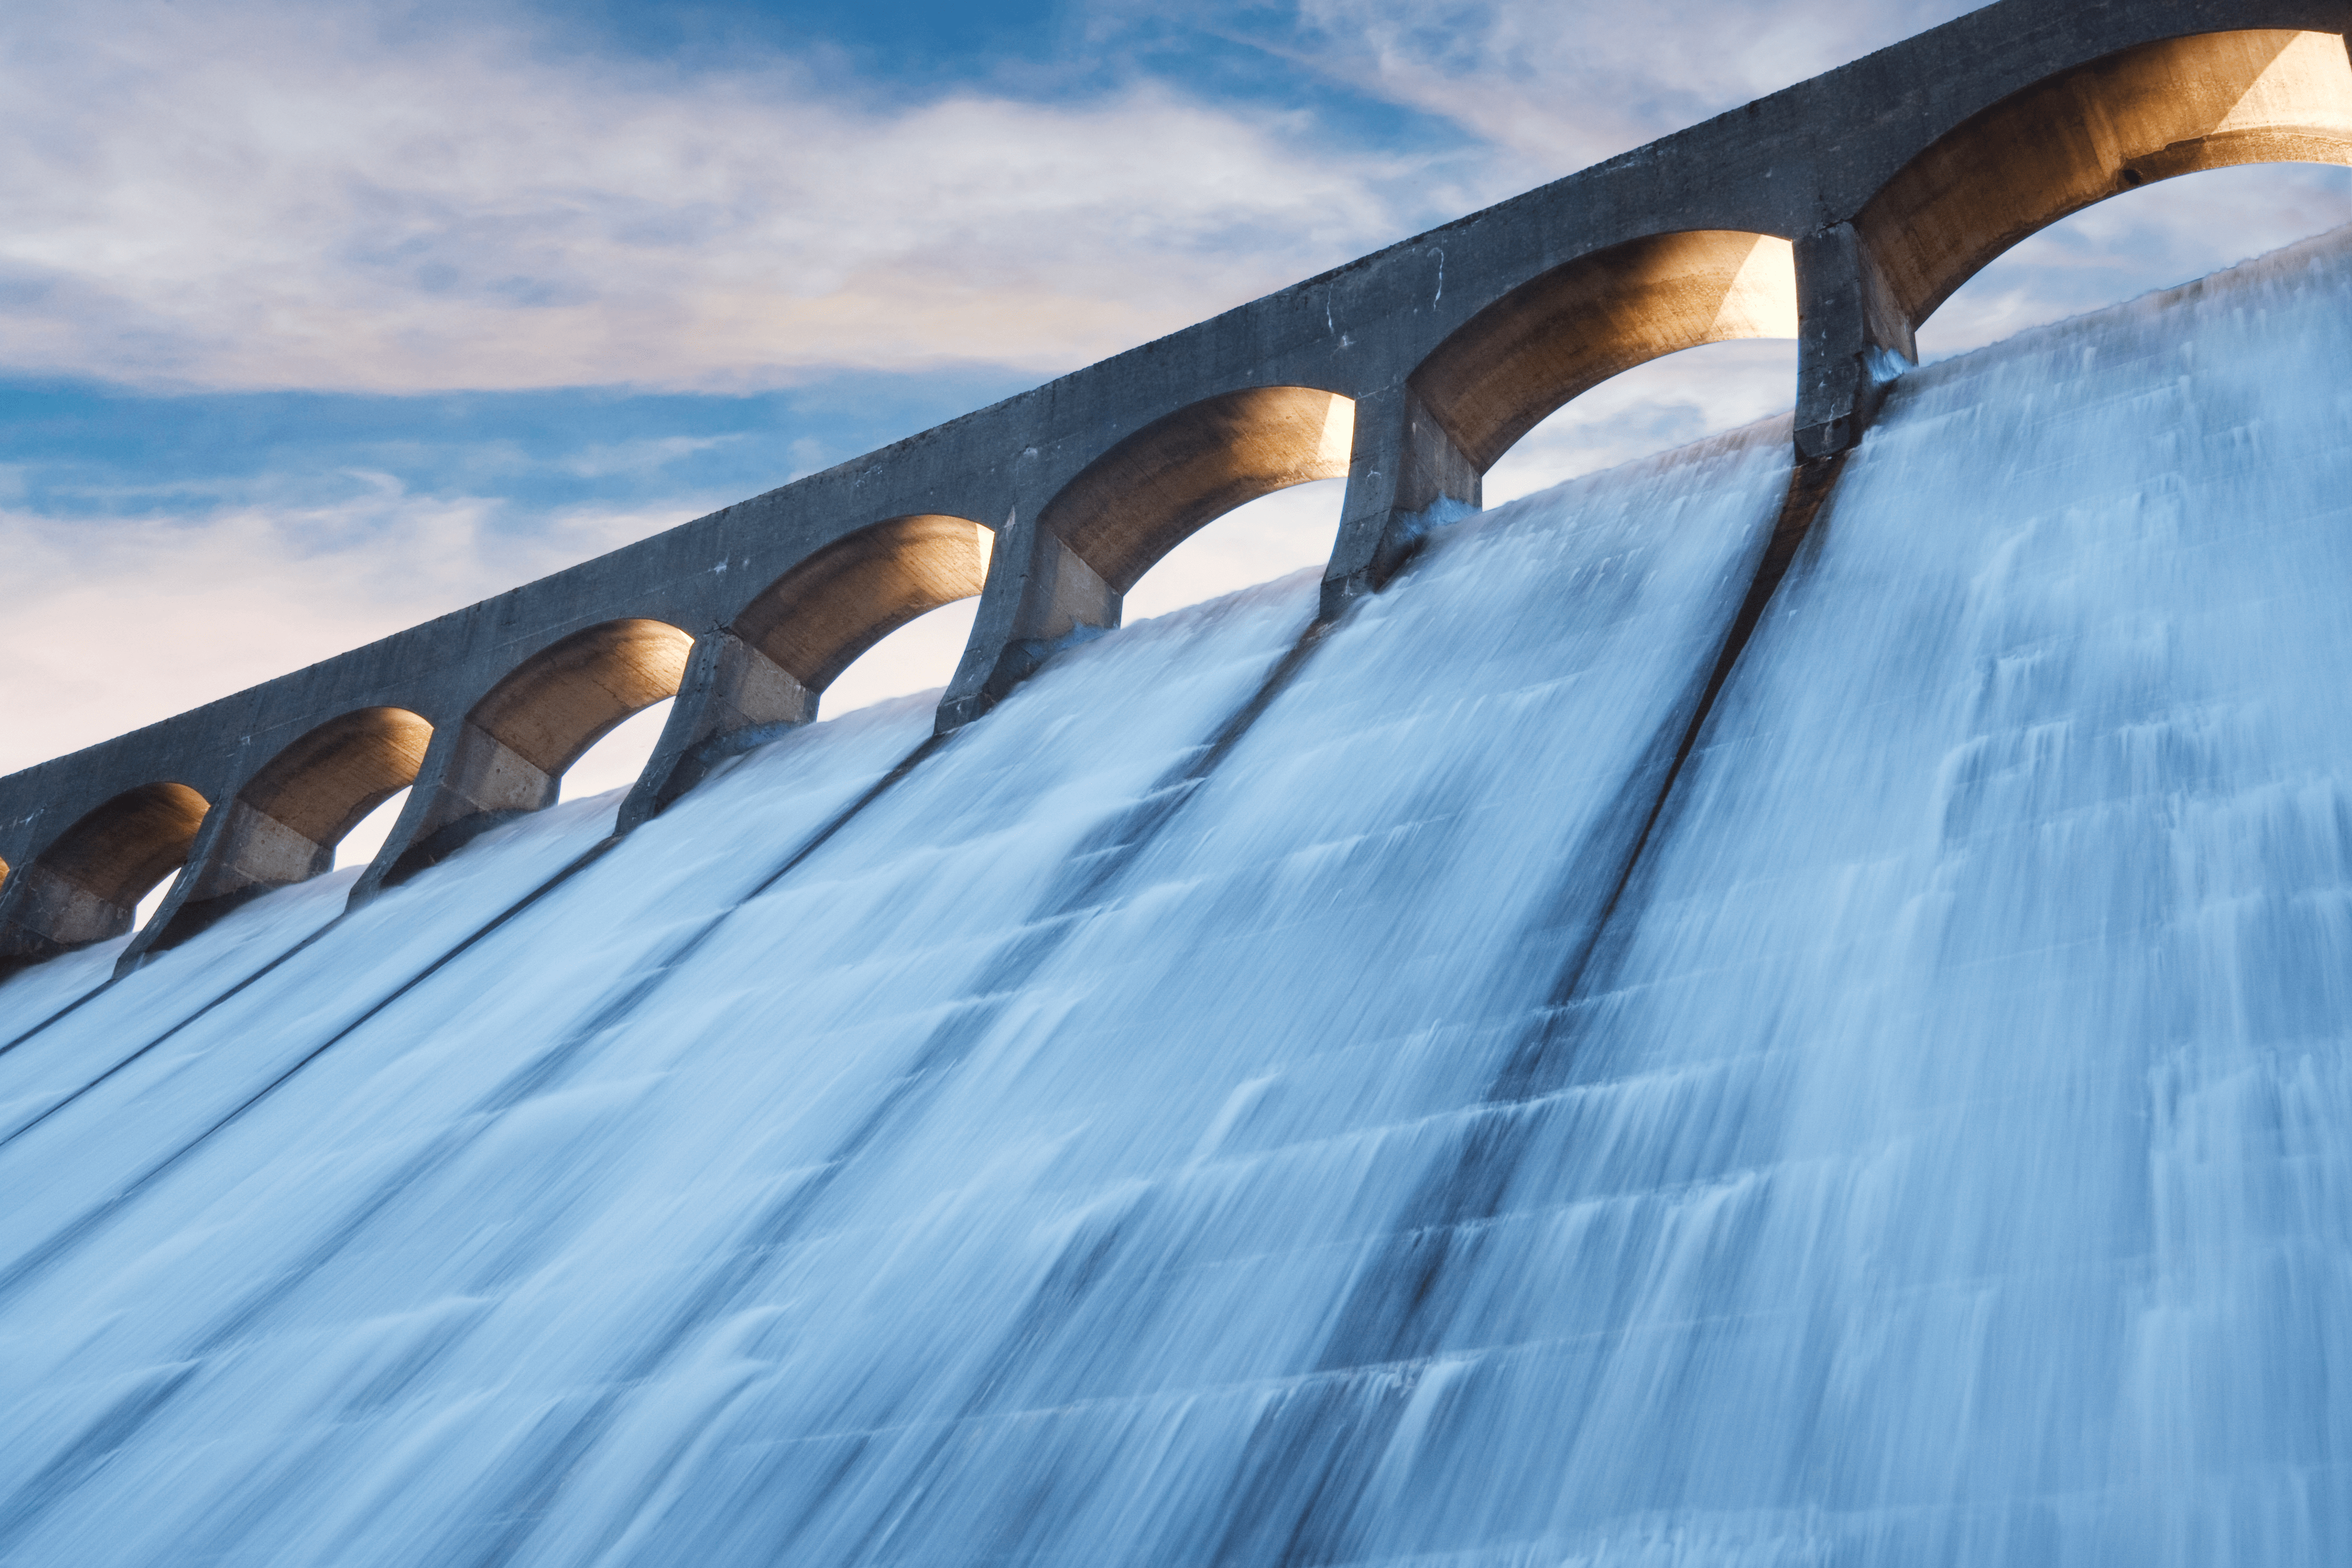 Delivering real-time dam monitoring for Northumbrian Water Group